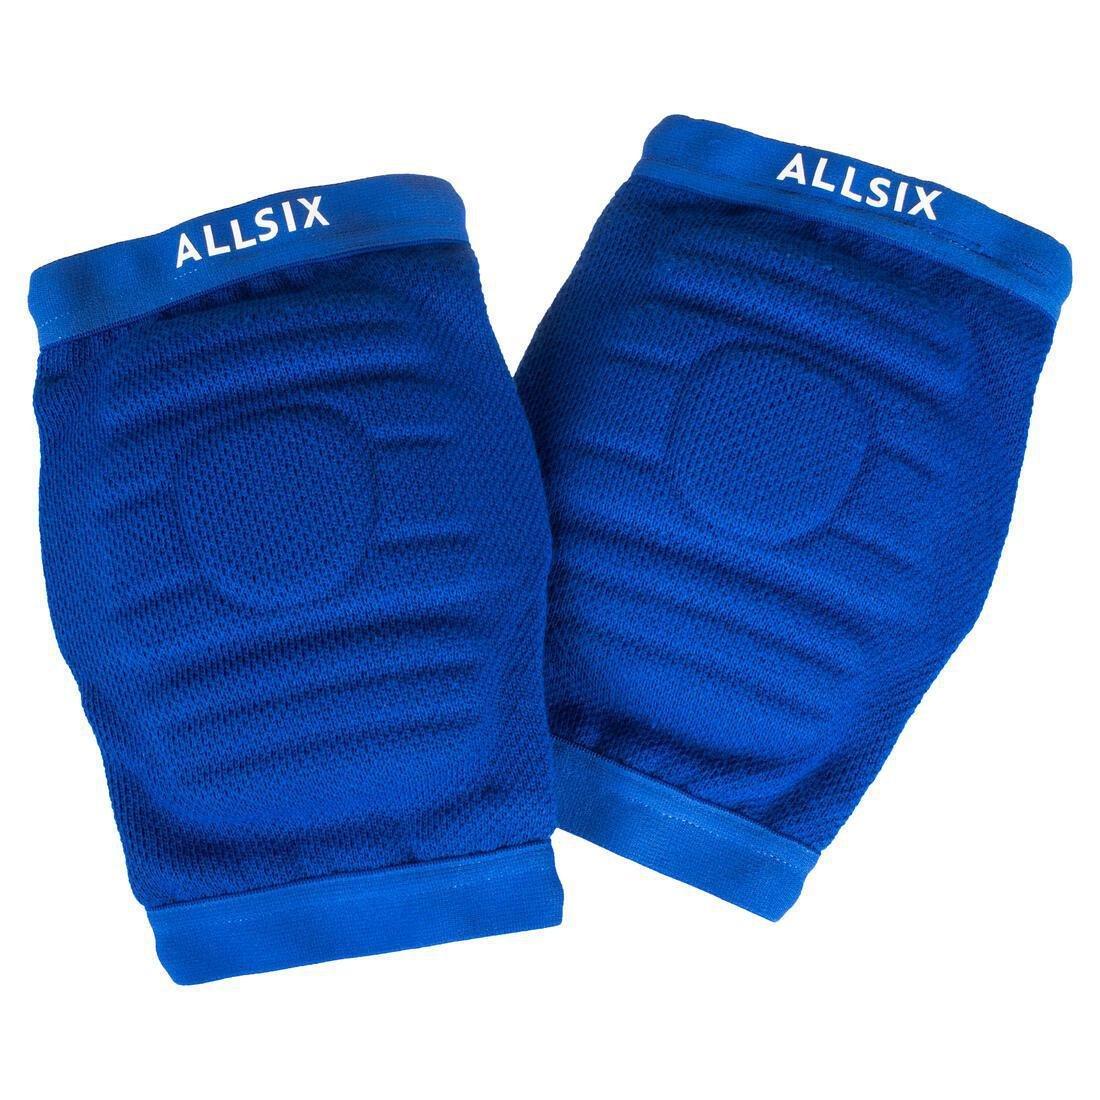 ALLSIX - Volleyball Knee Pads VKP900, Royal blue